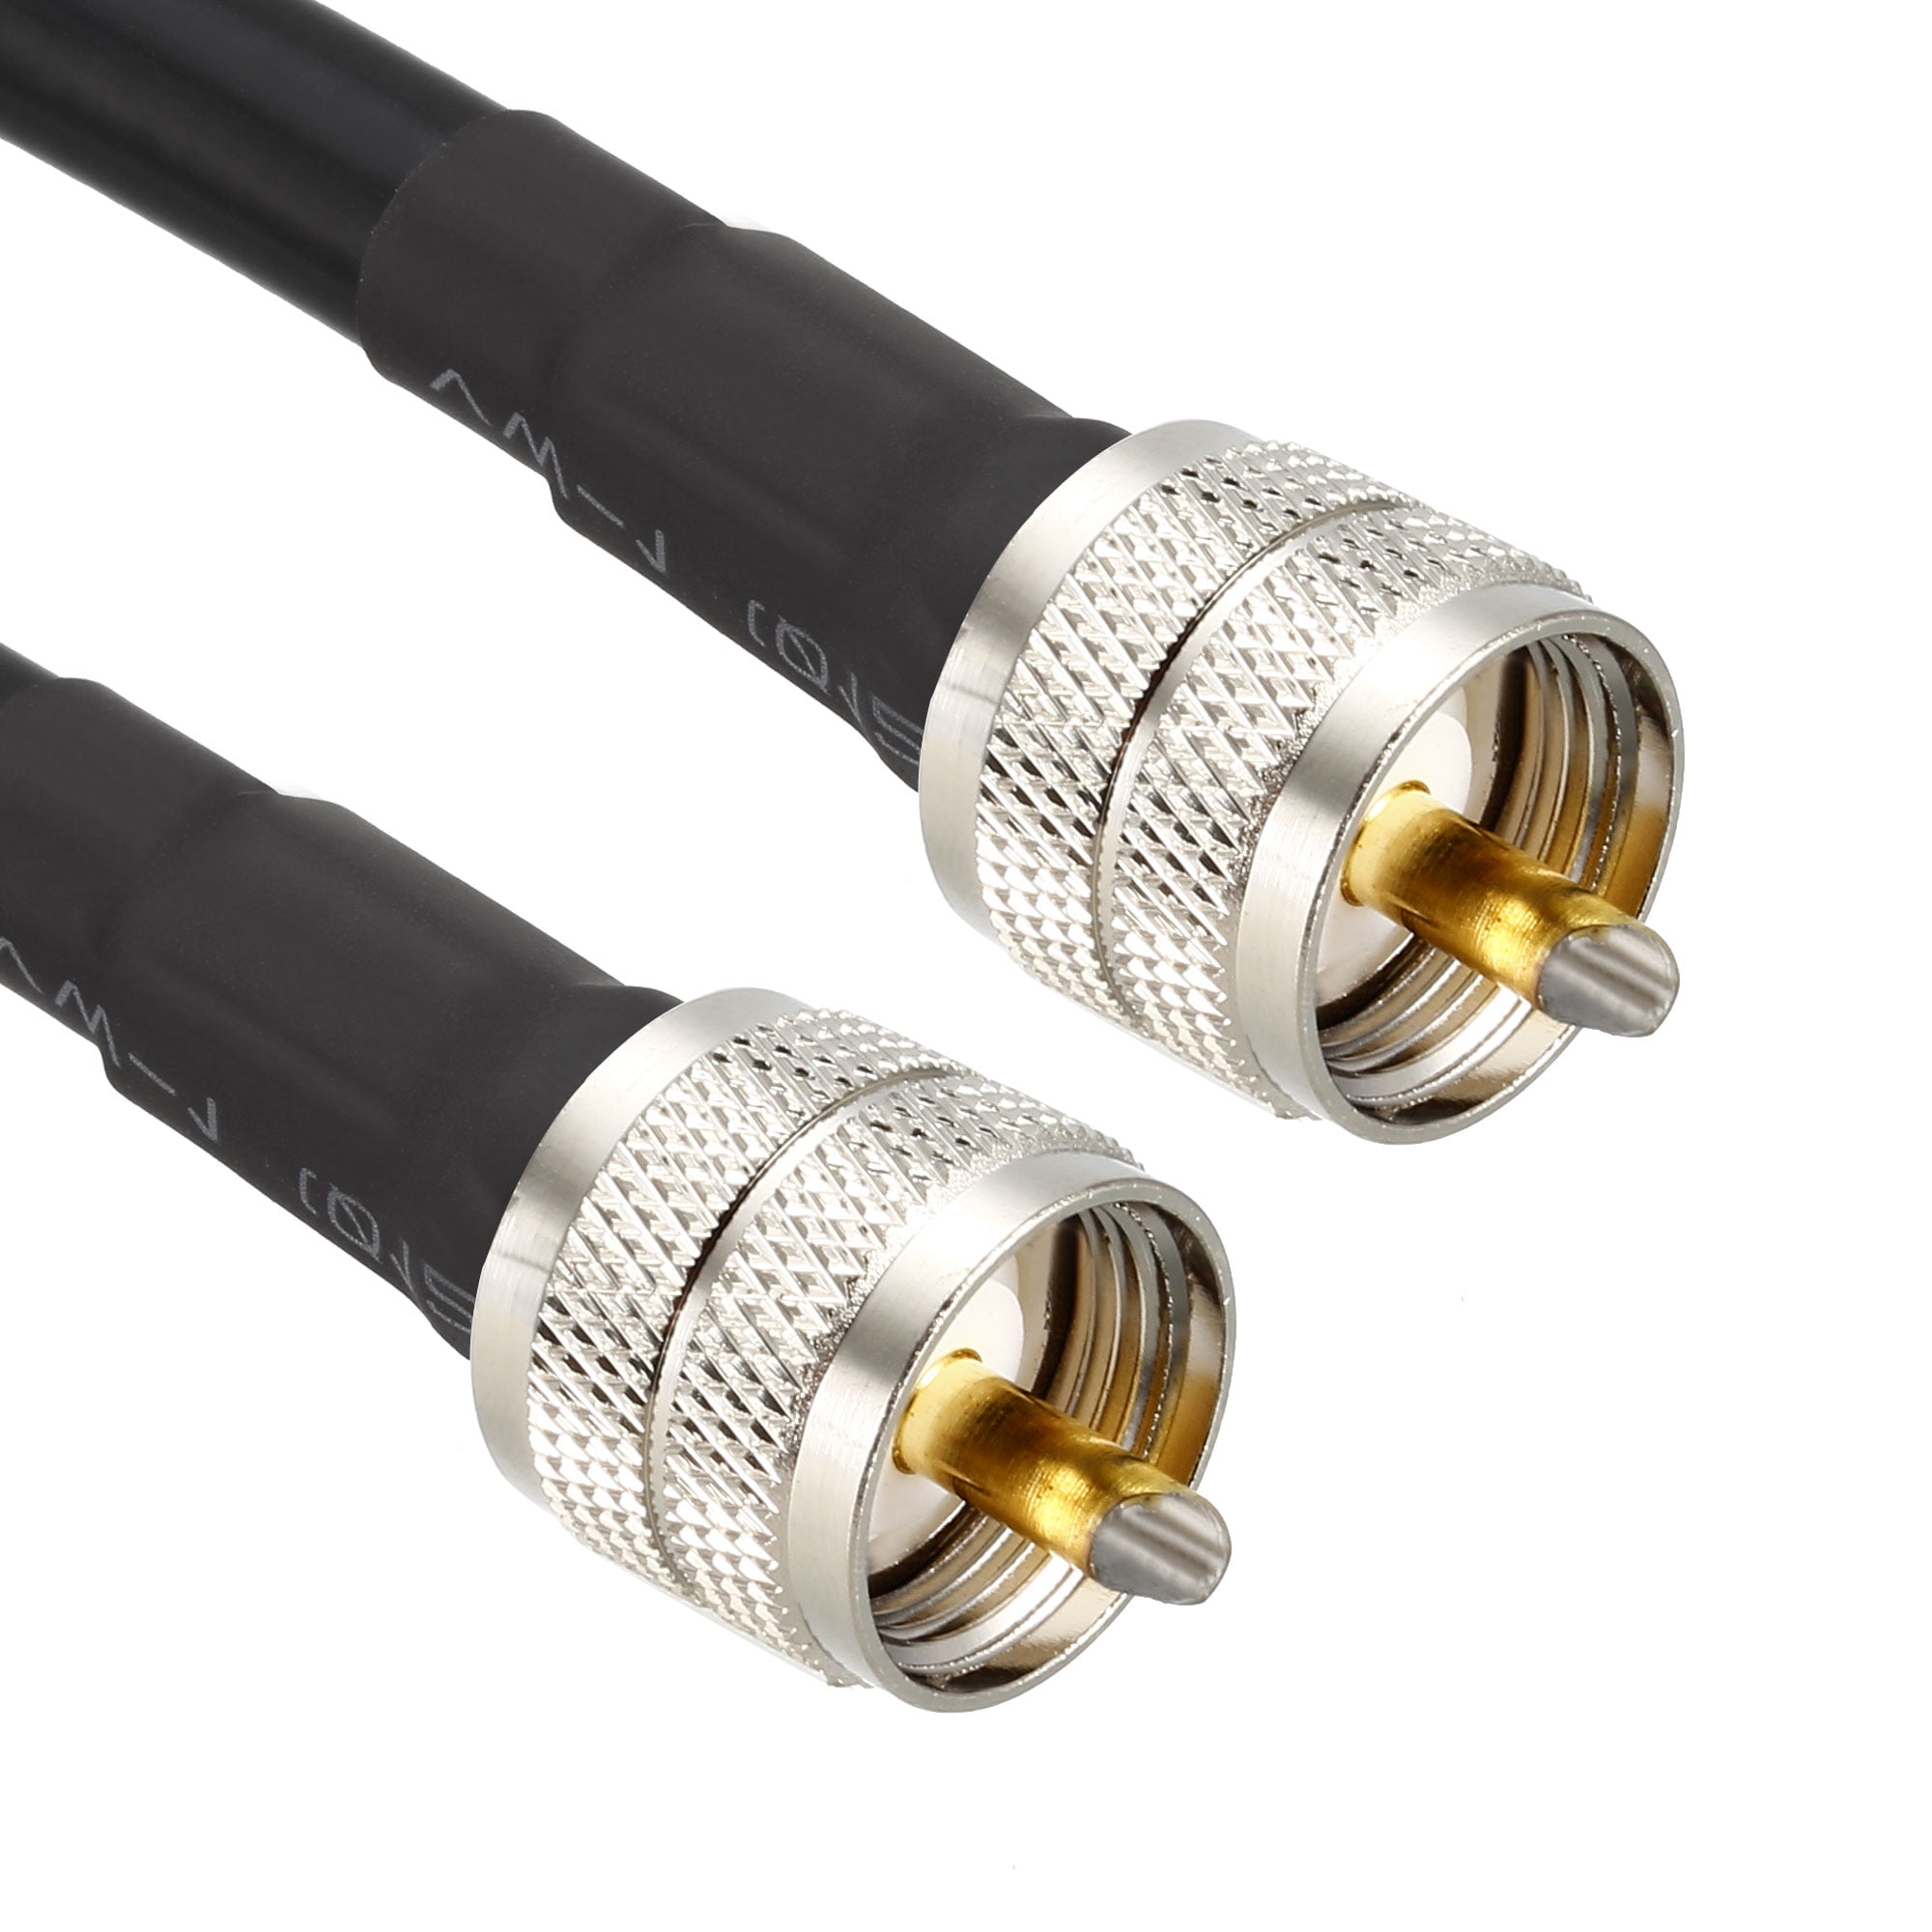 NA RG8X coaxial Cable with Pl-259 Male connectors for CB/Ham Radio 1.64 feet